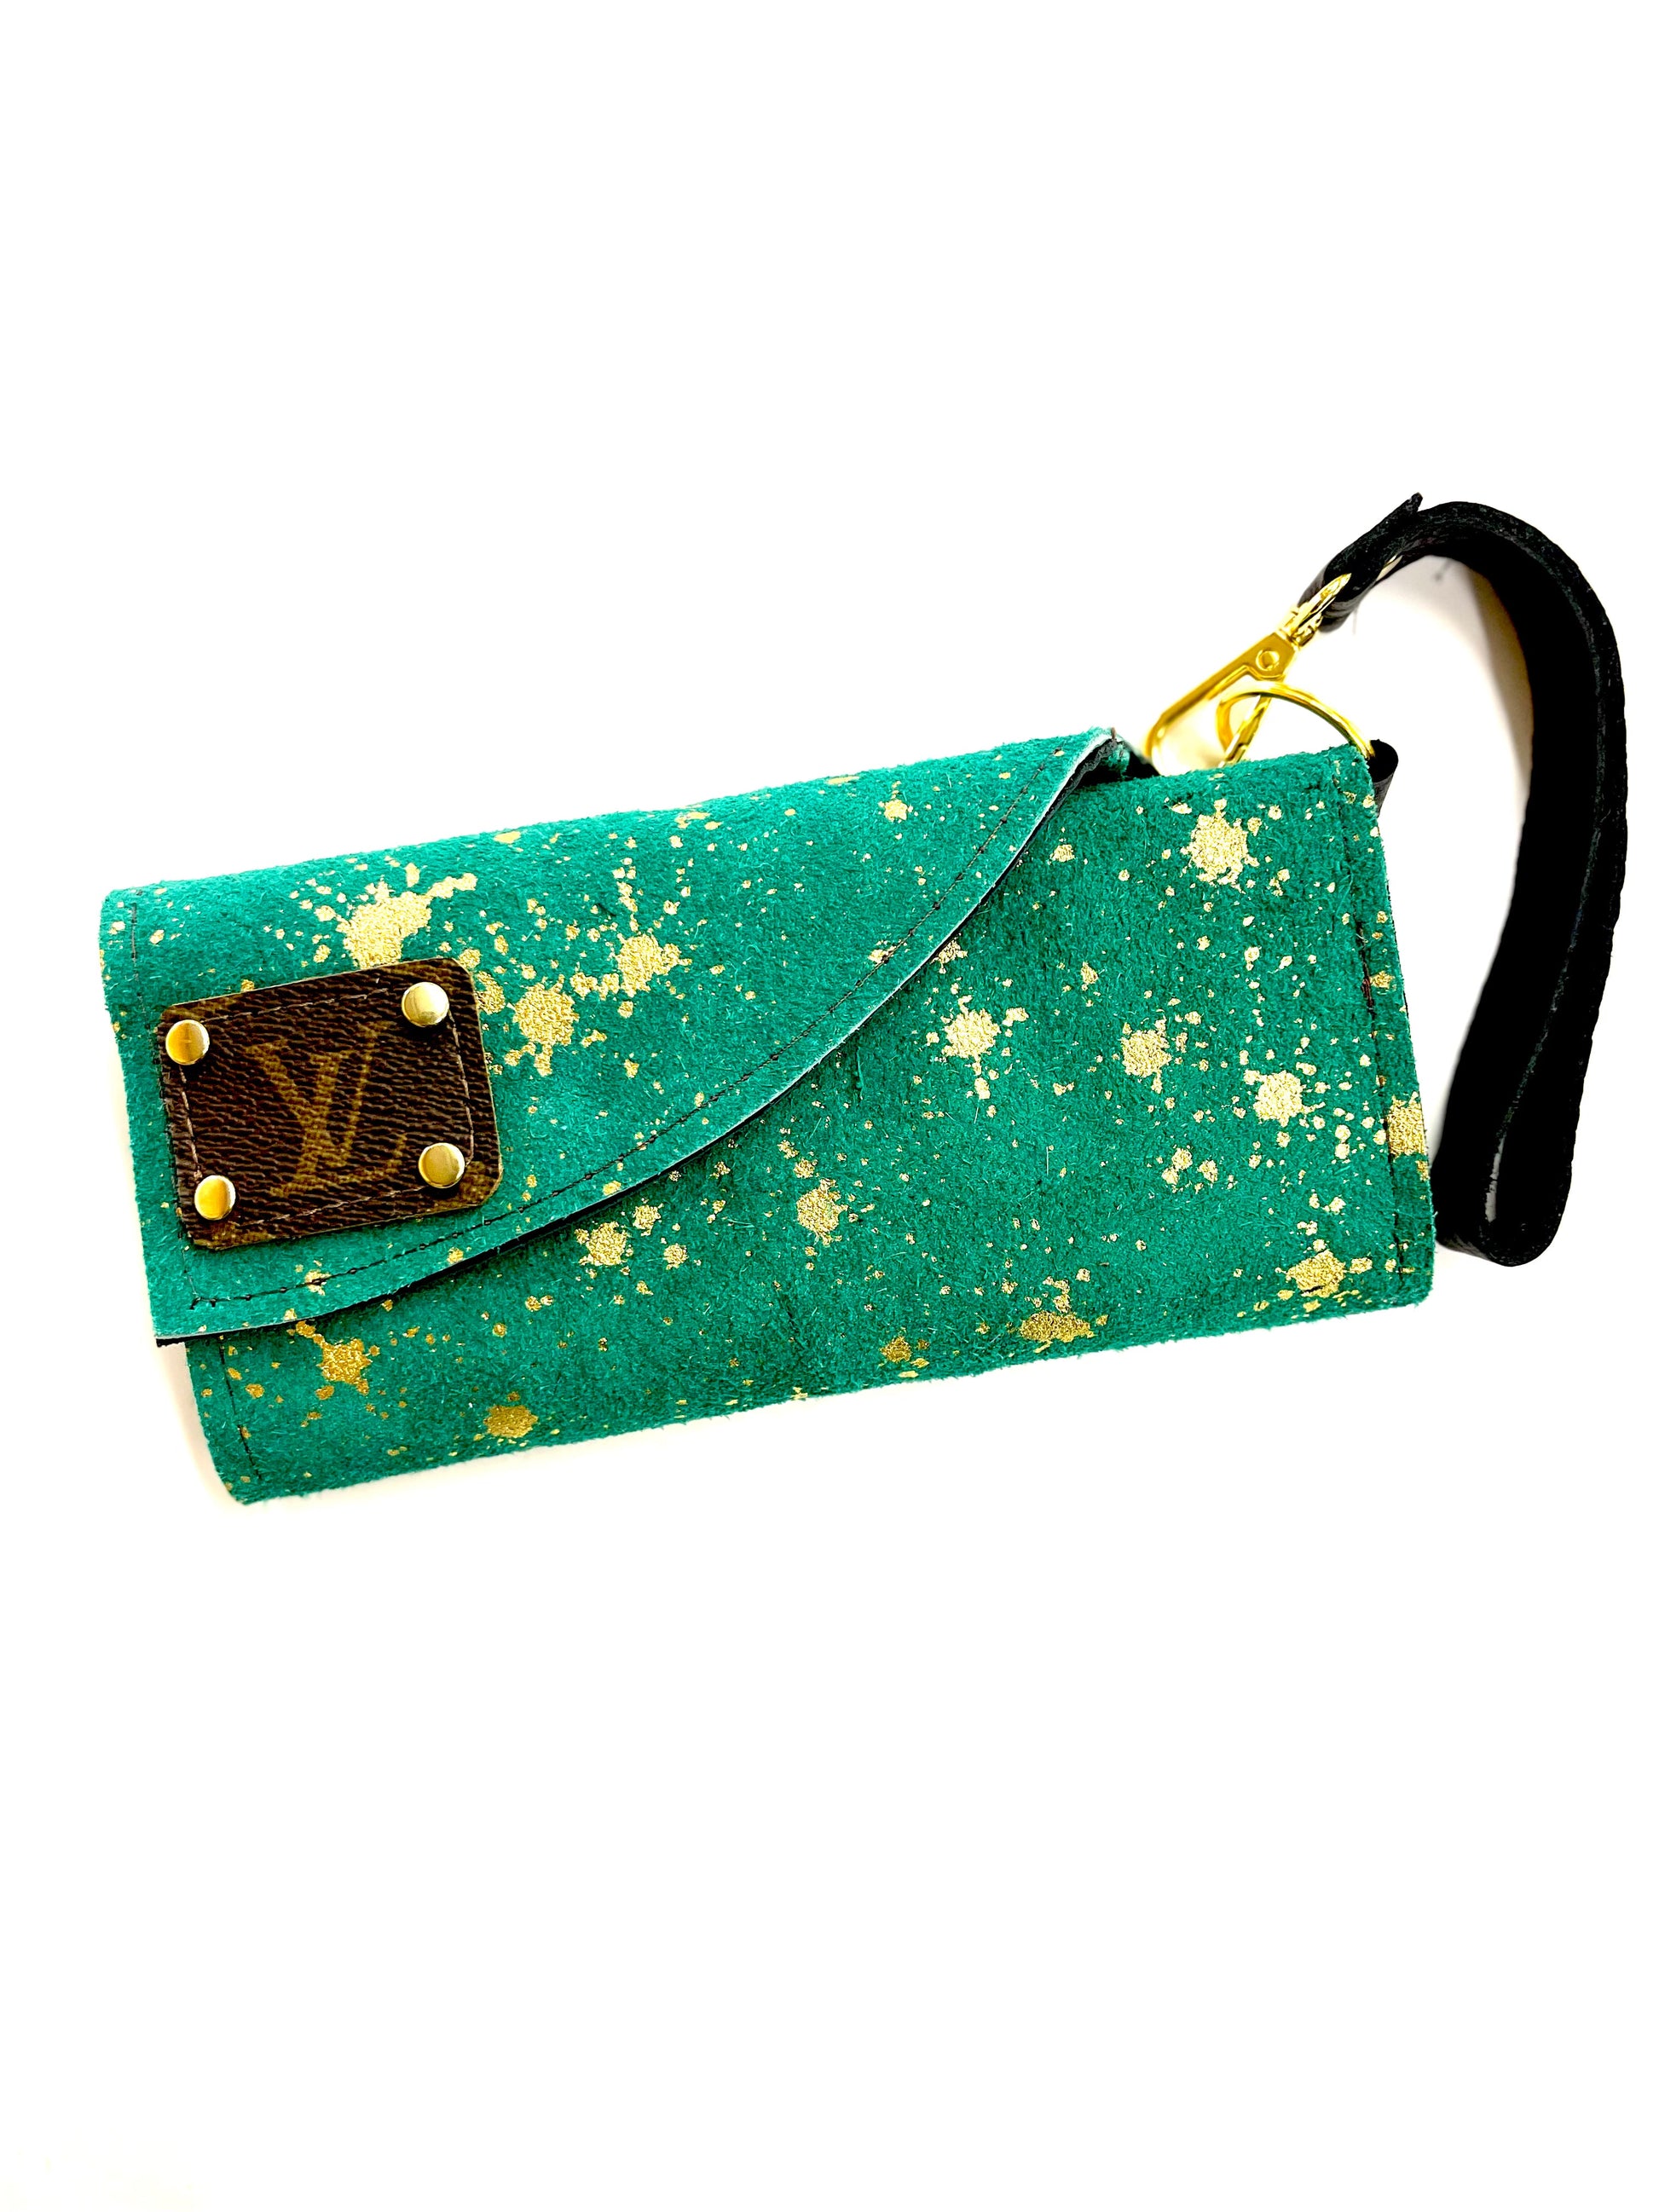 Tri Fold Wristlet Wallet, Multiple color options -holds large phone too - Patches Of Upcycling